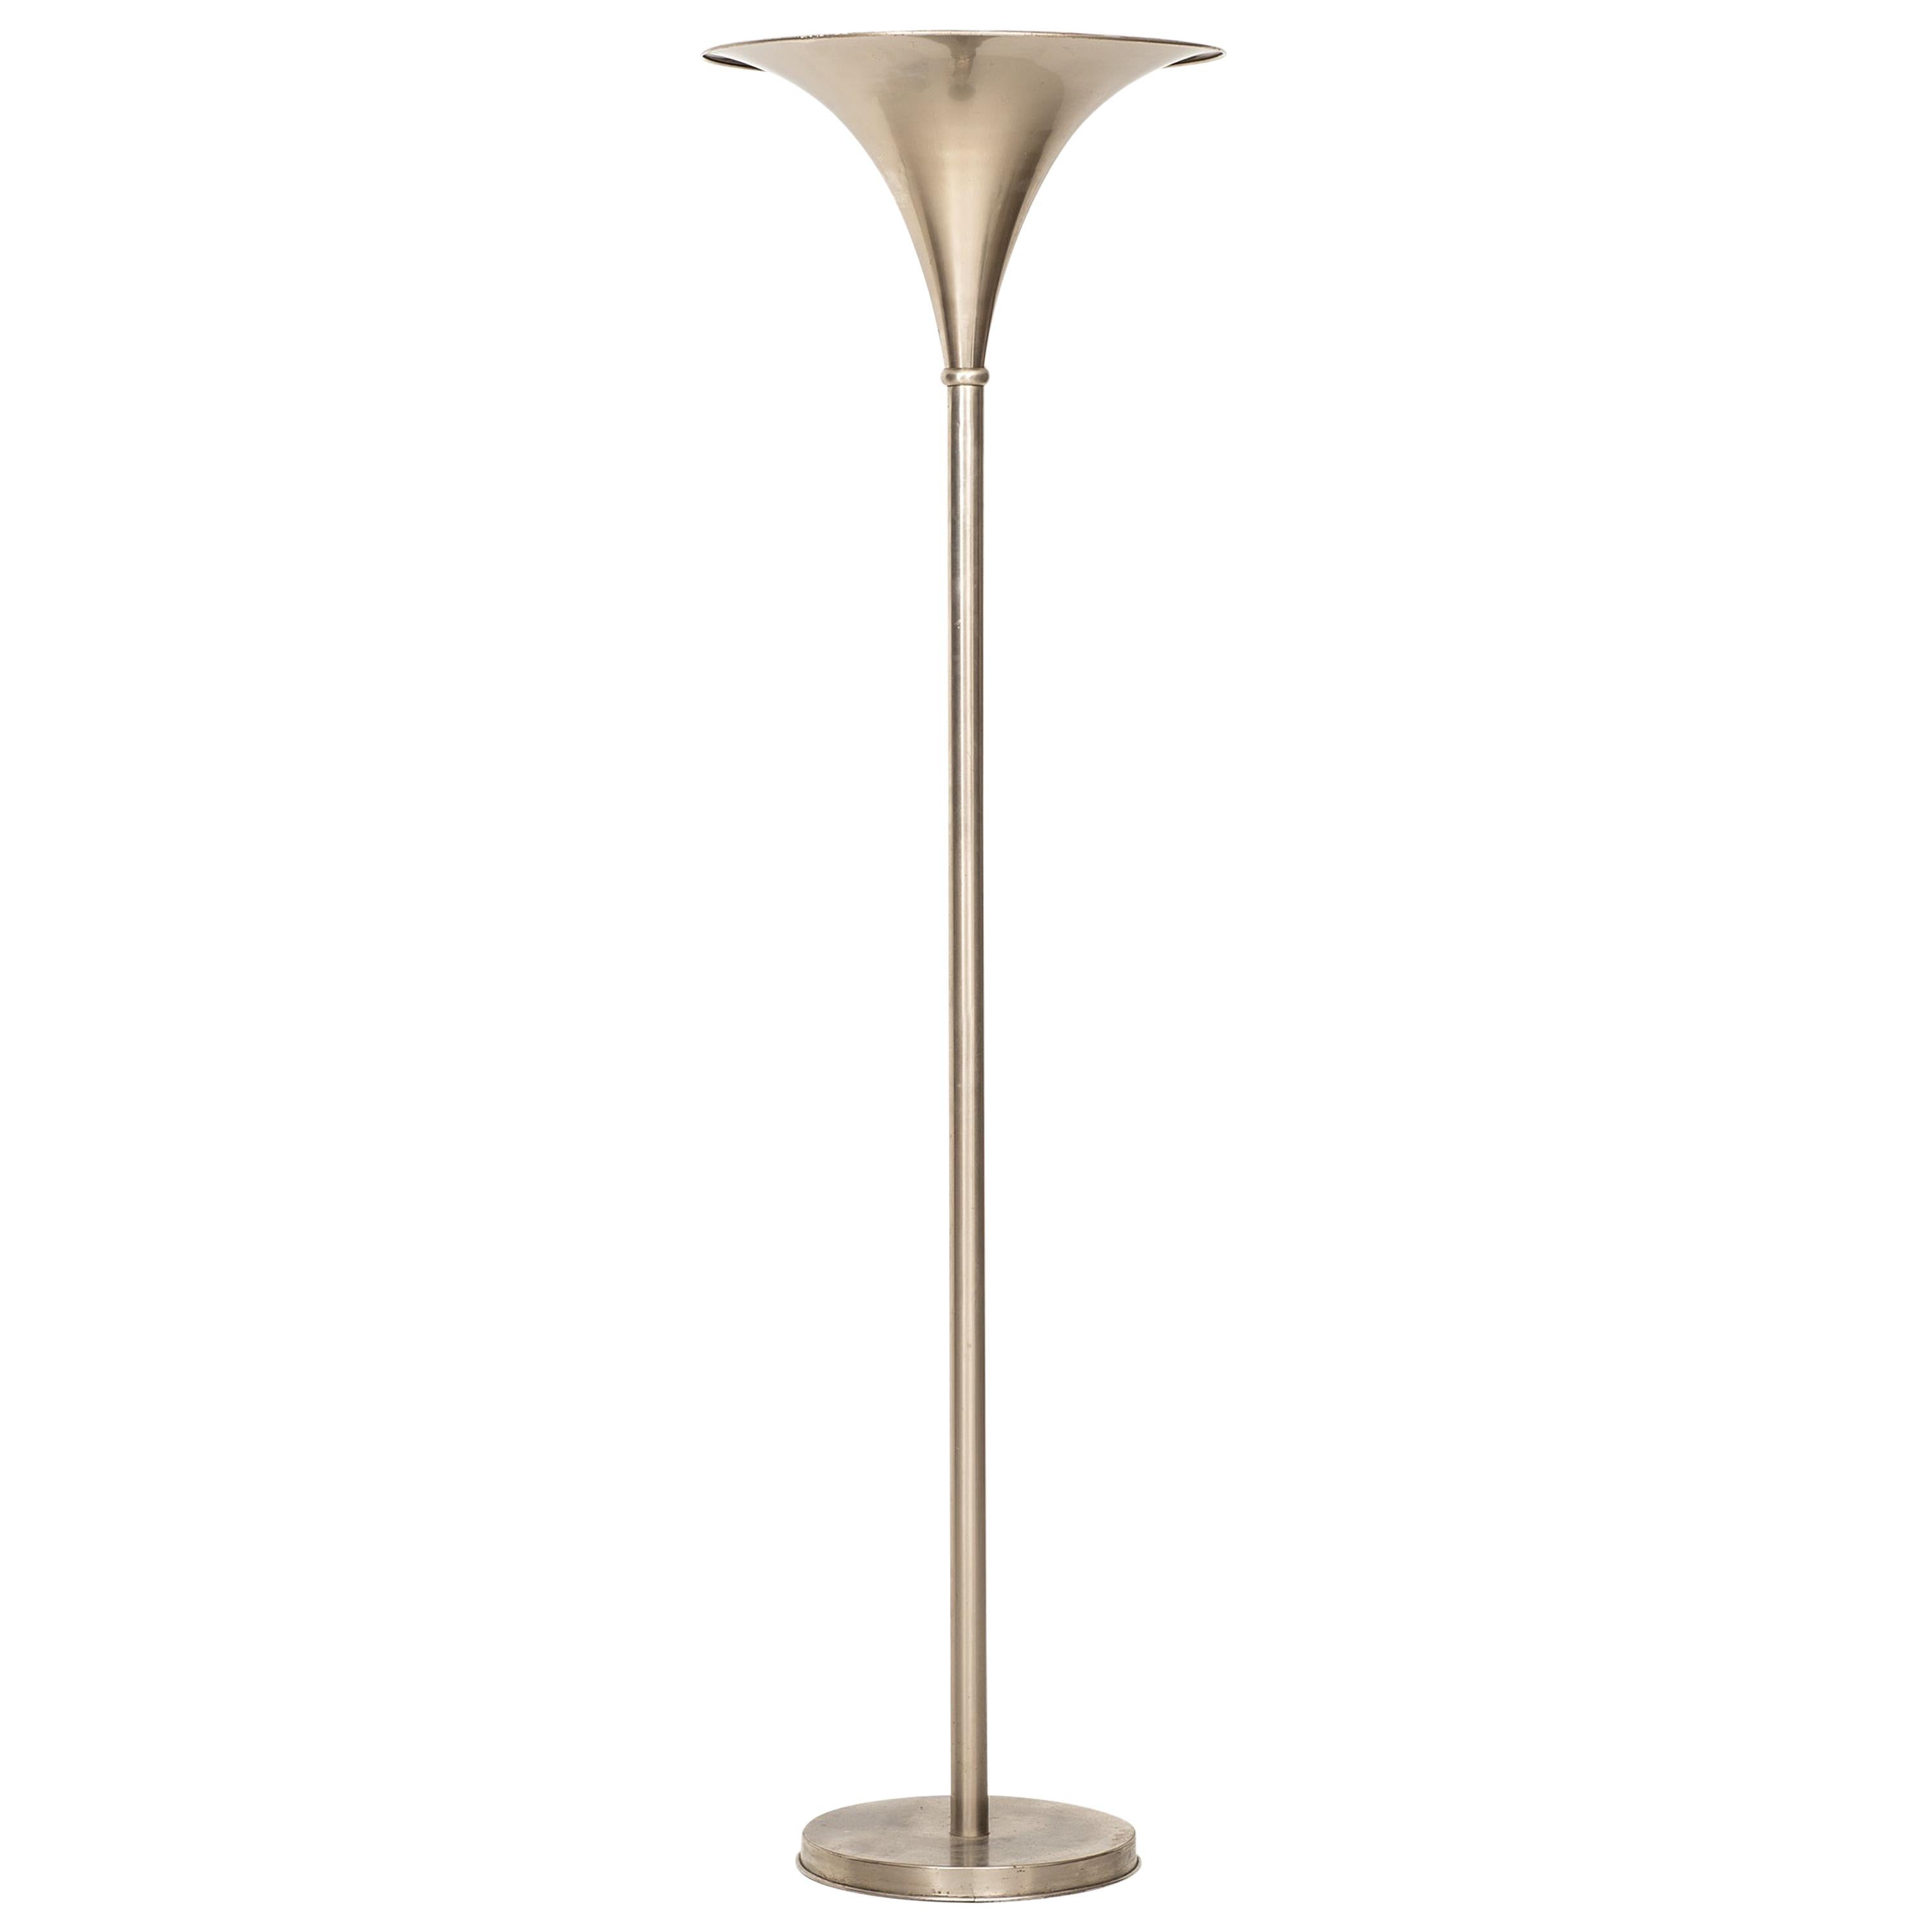 Floor Lamp / Uplight Attributed to William Watting Produced in Denmark